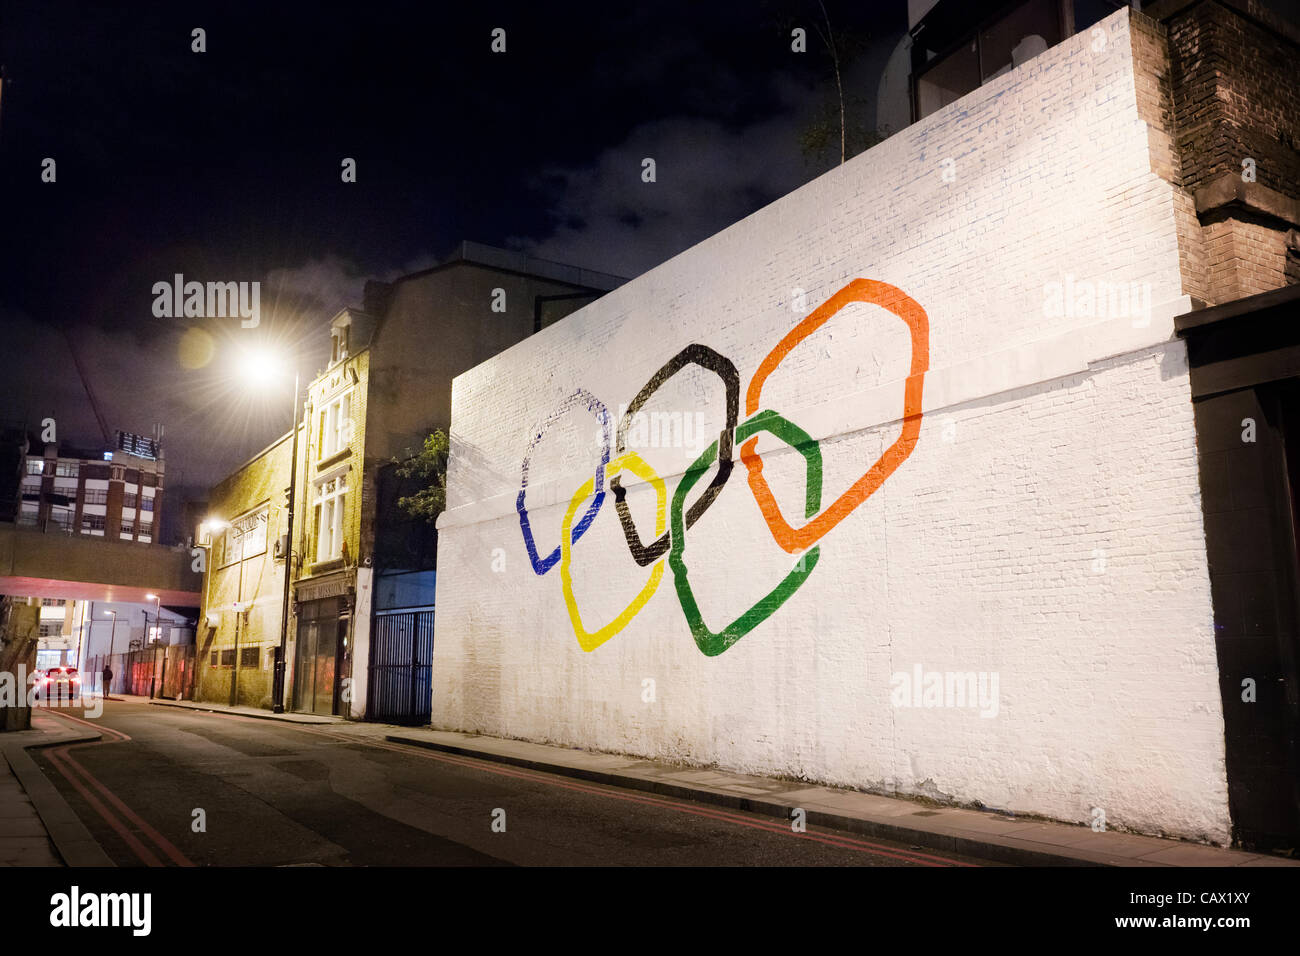 The Olympic rings painted on a wall by a street art organisation called 'The Toasters' in Holywell Lane, Shoreditch, London, UK, on the 29th of April 2012. Stock Photo